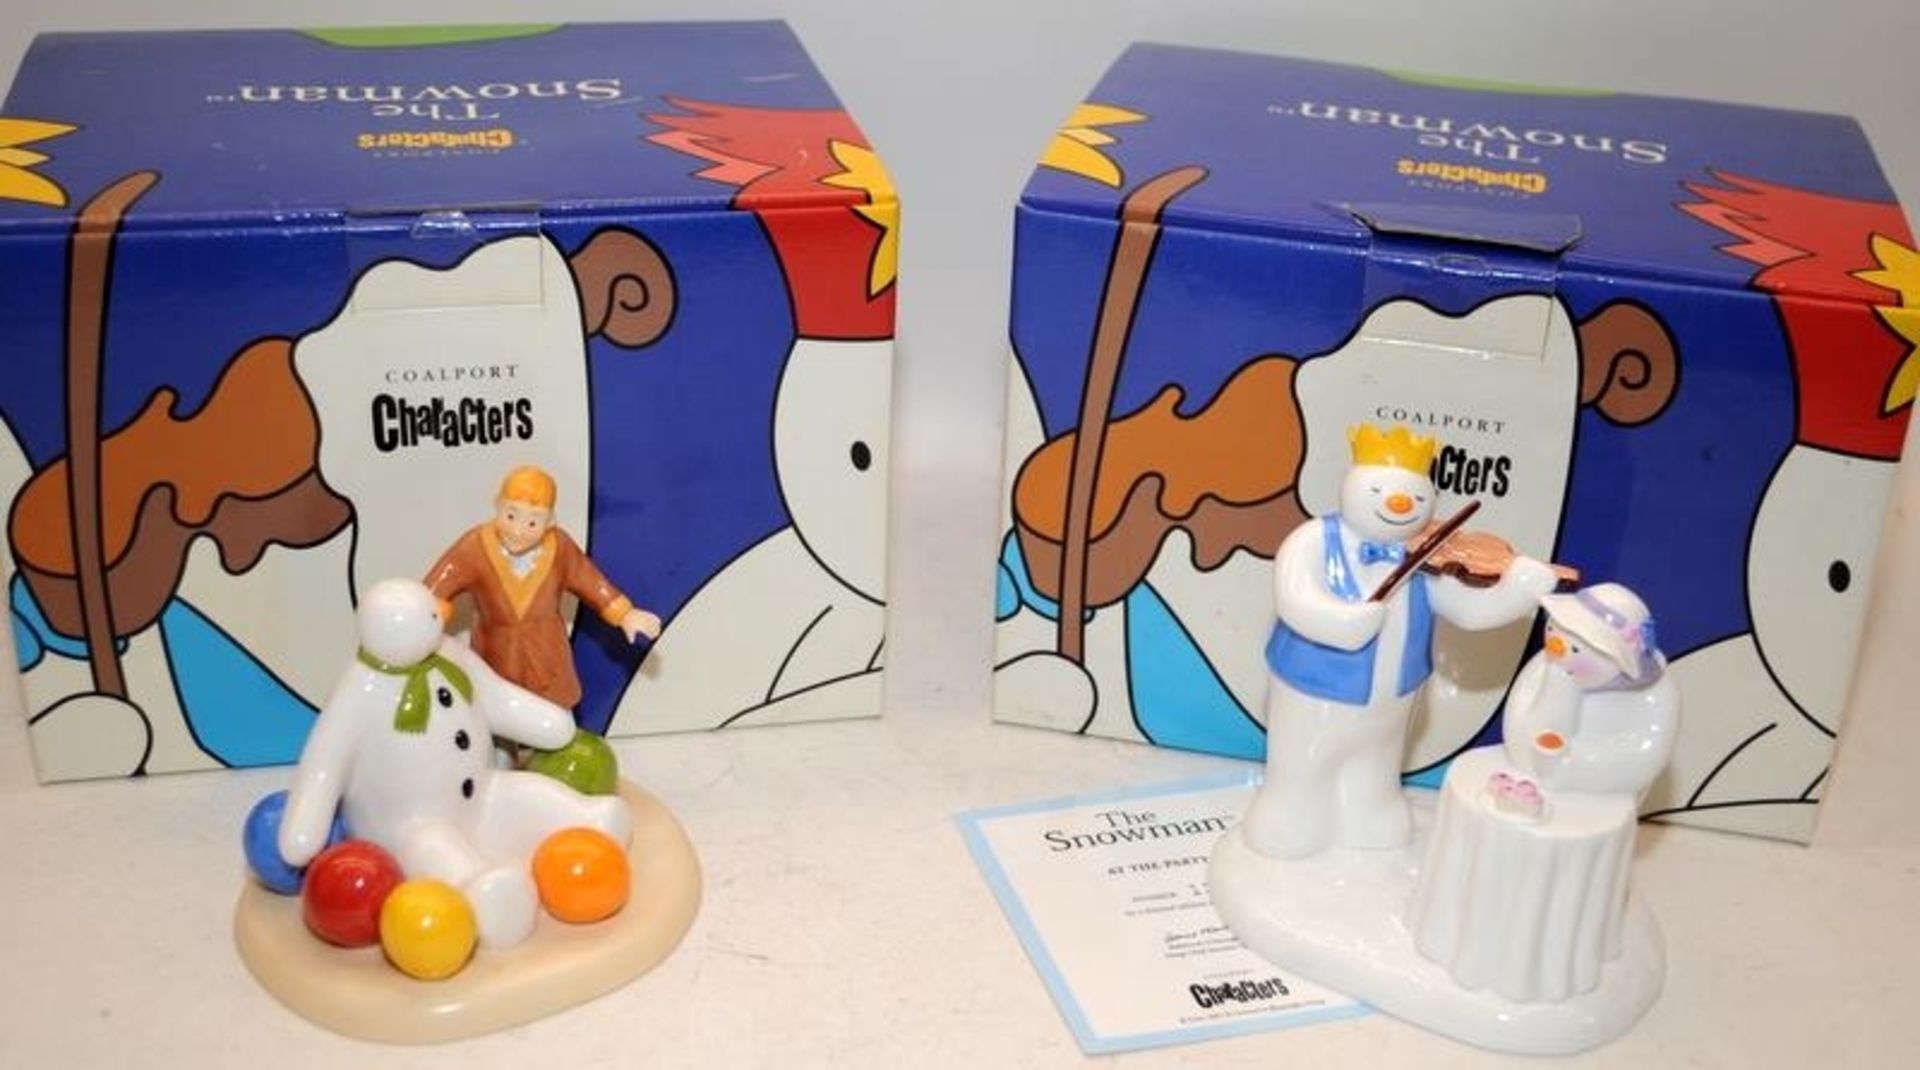 2 x Coalport The Snowman figurines: At The Party - Limited Edition 1199/2000 c/w Soft Landing.